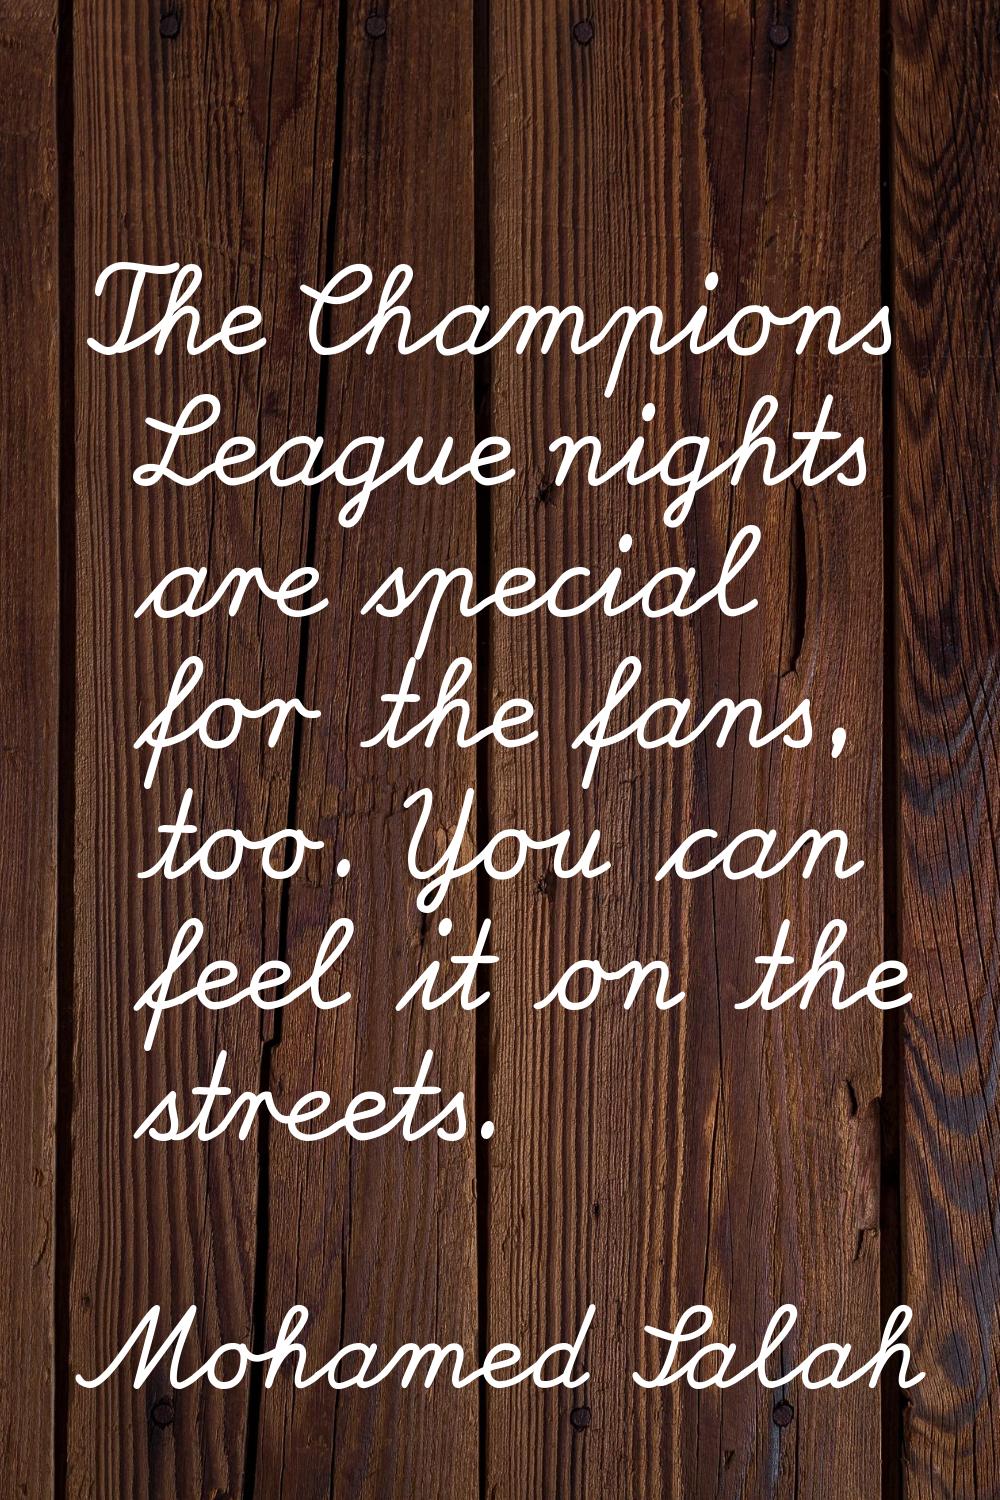 The Champions League nights are special for the fans, too. You can feel it on the streets.